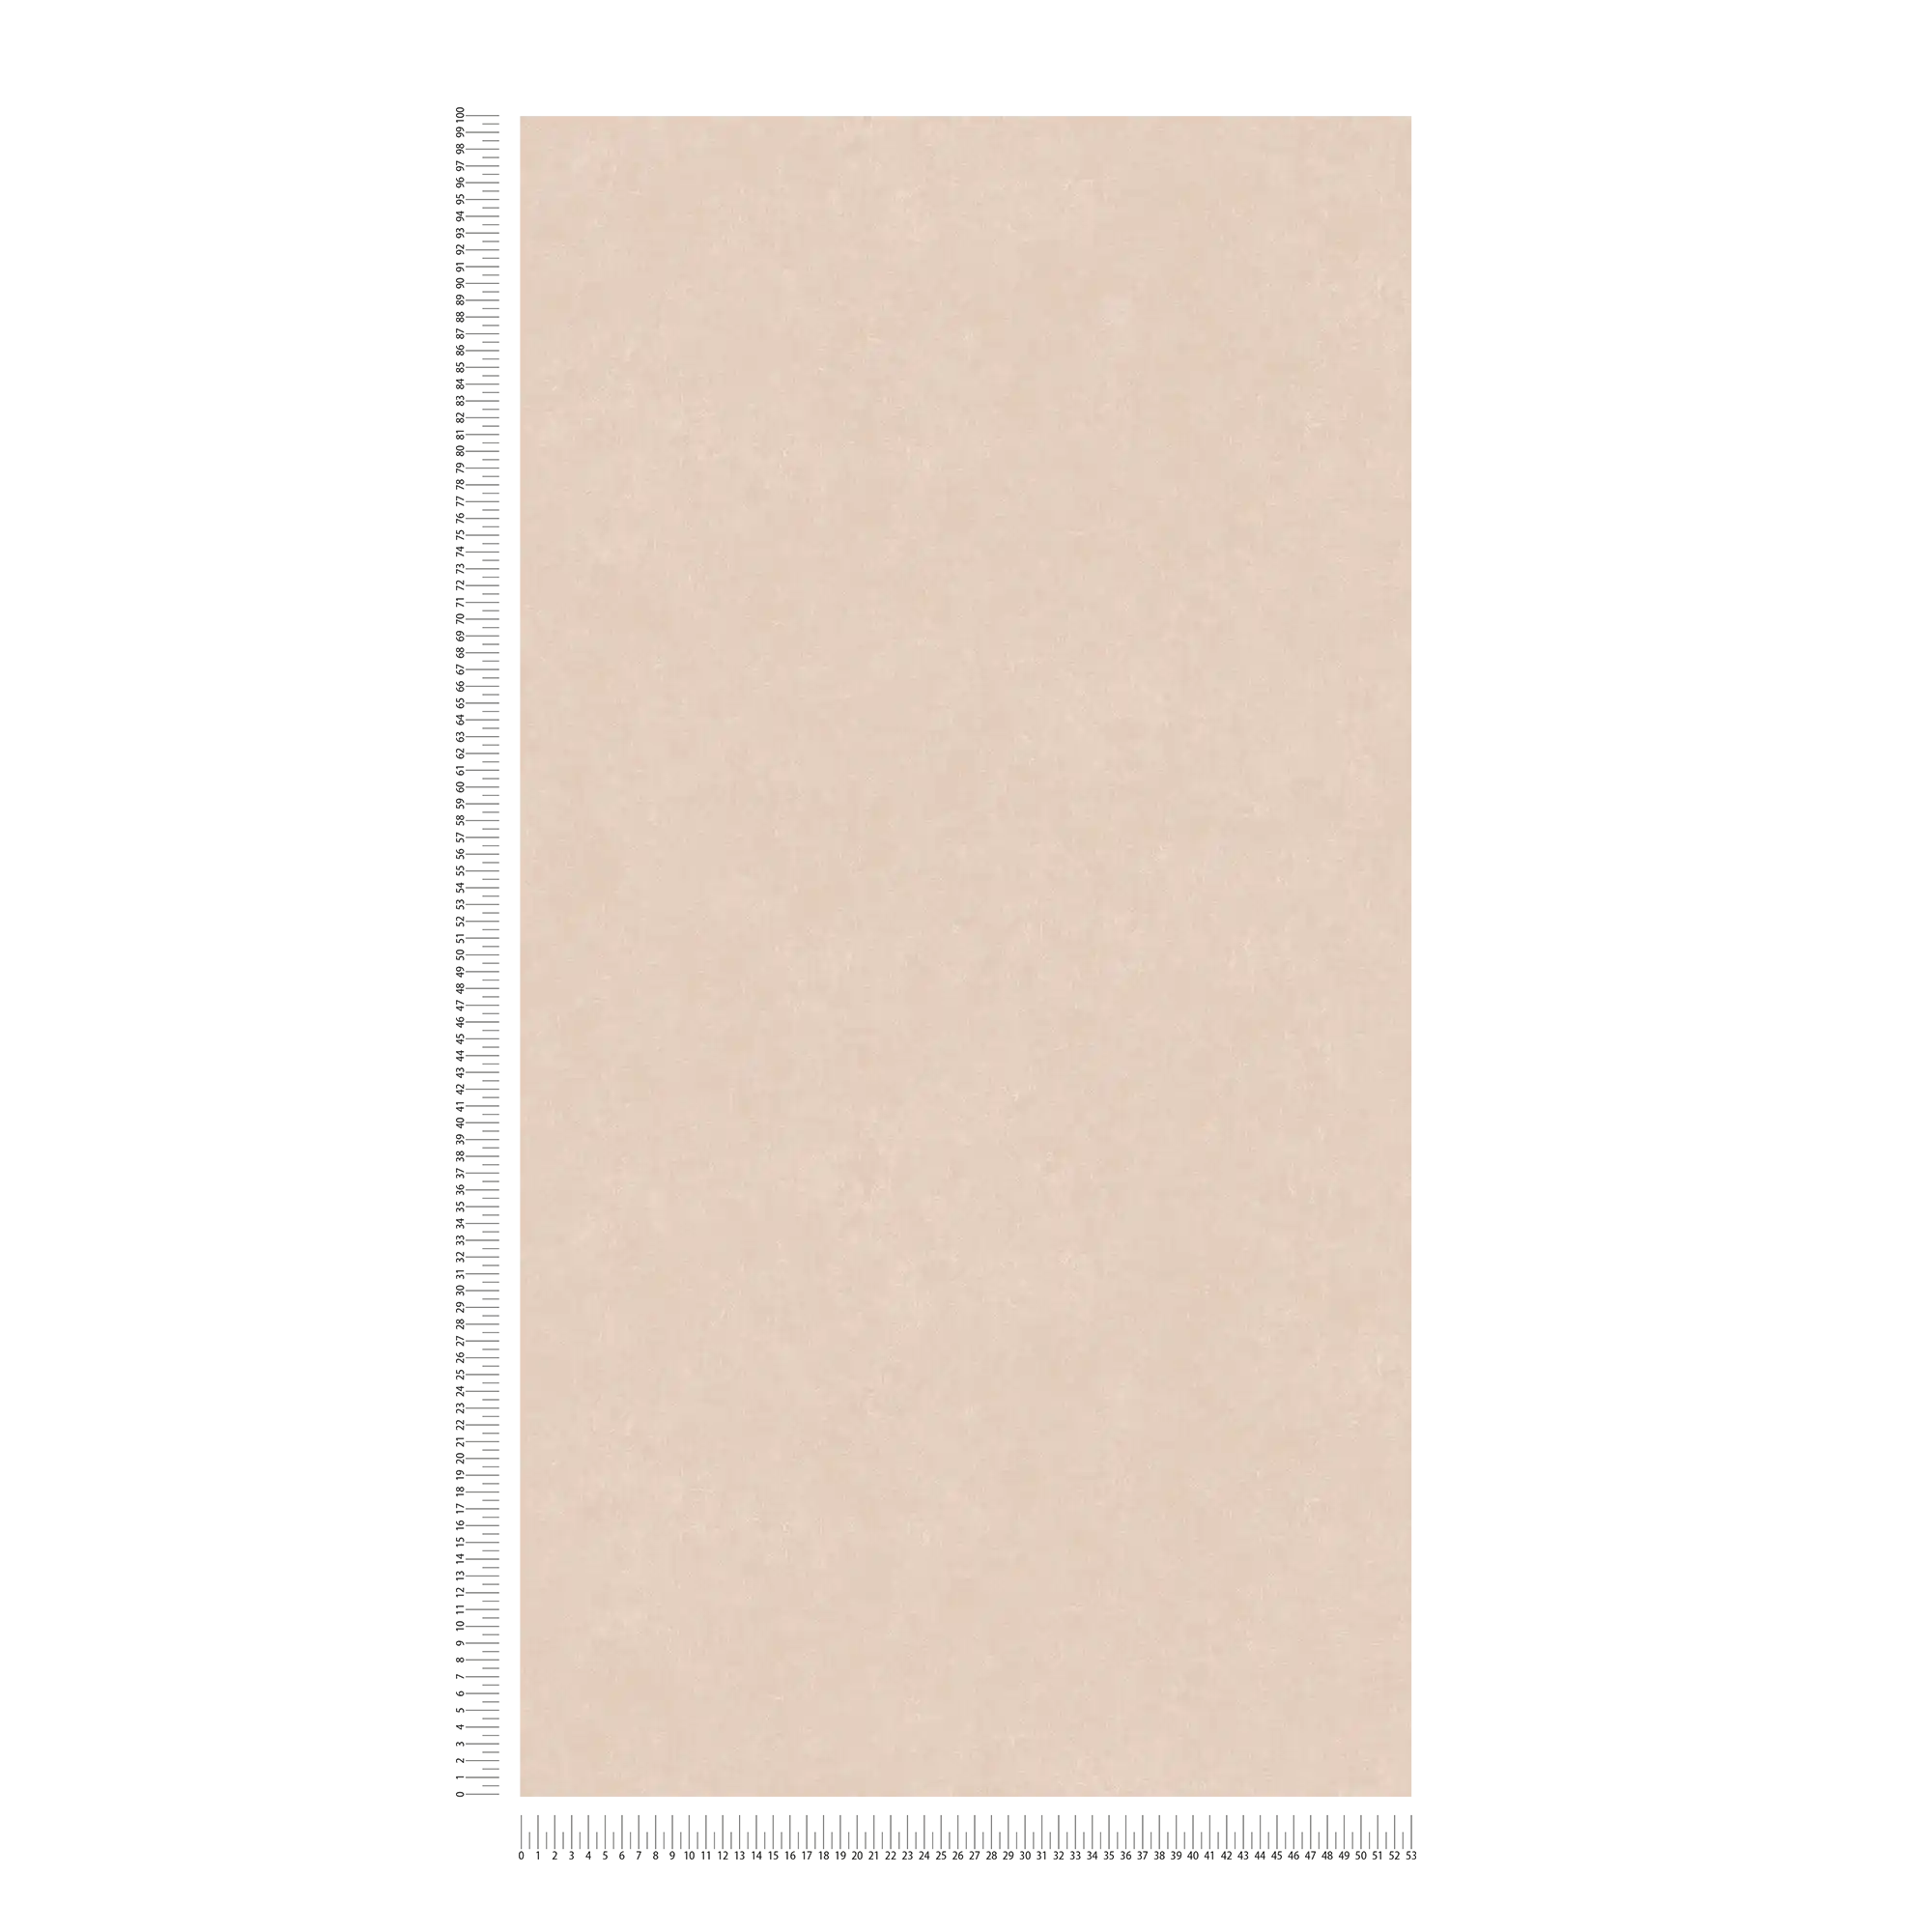             Structured wallpaper beige-pink with non-woven backing - pink
        